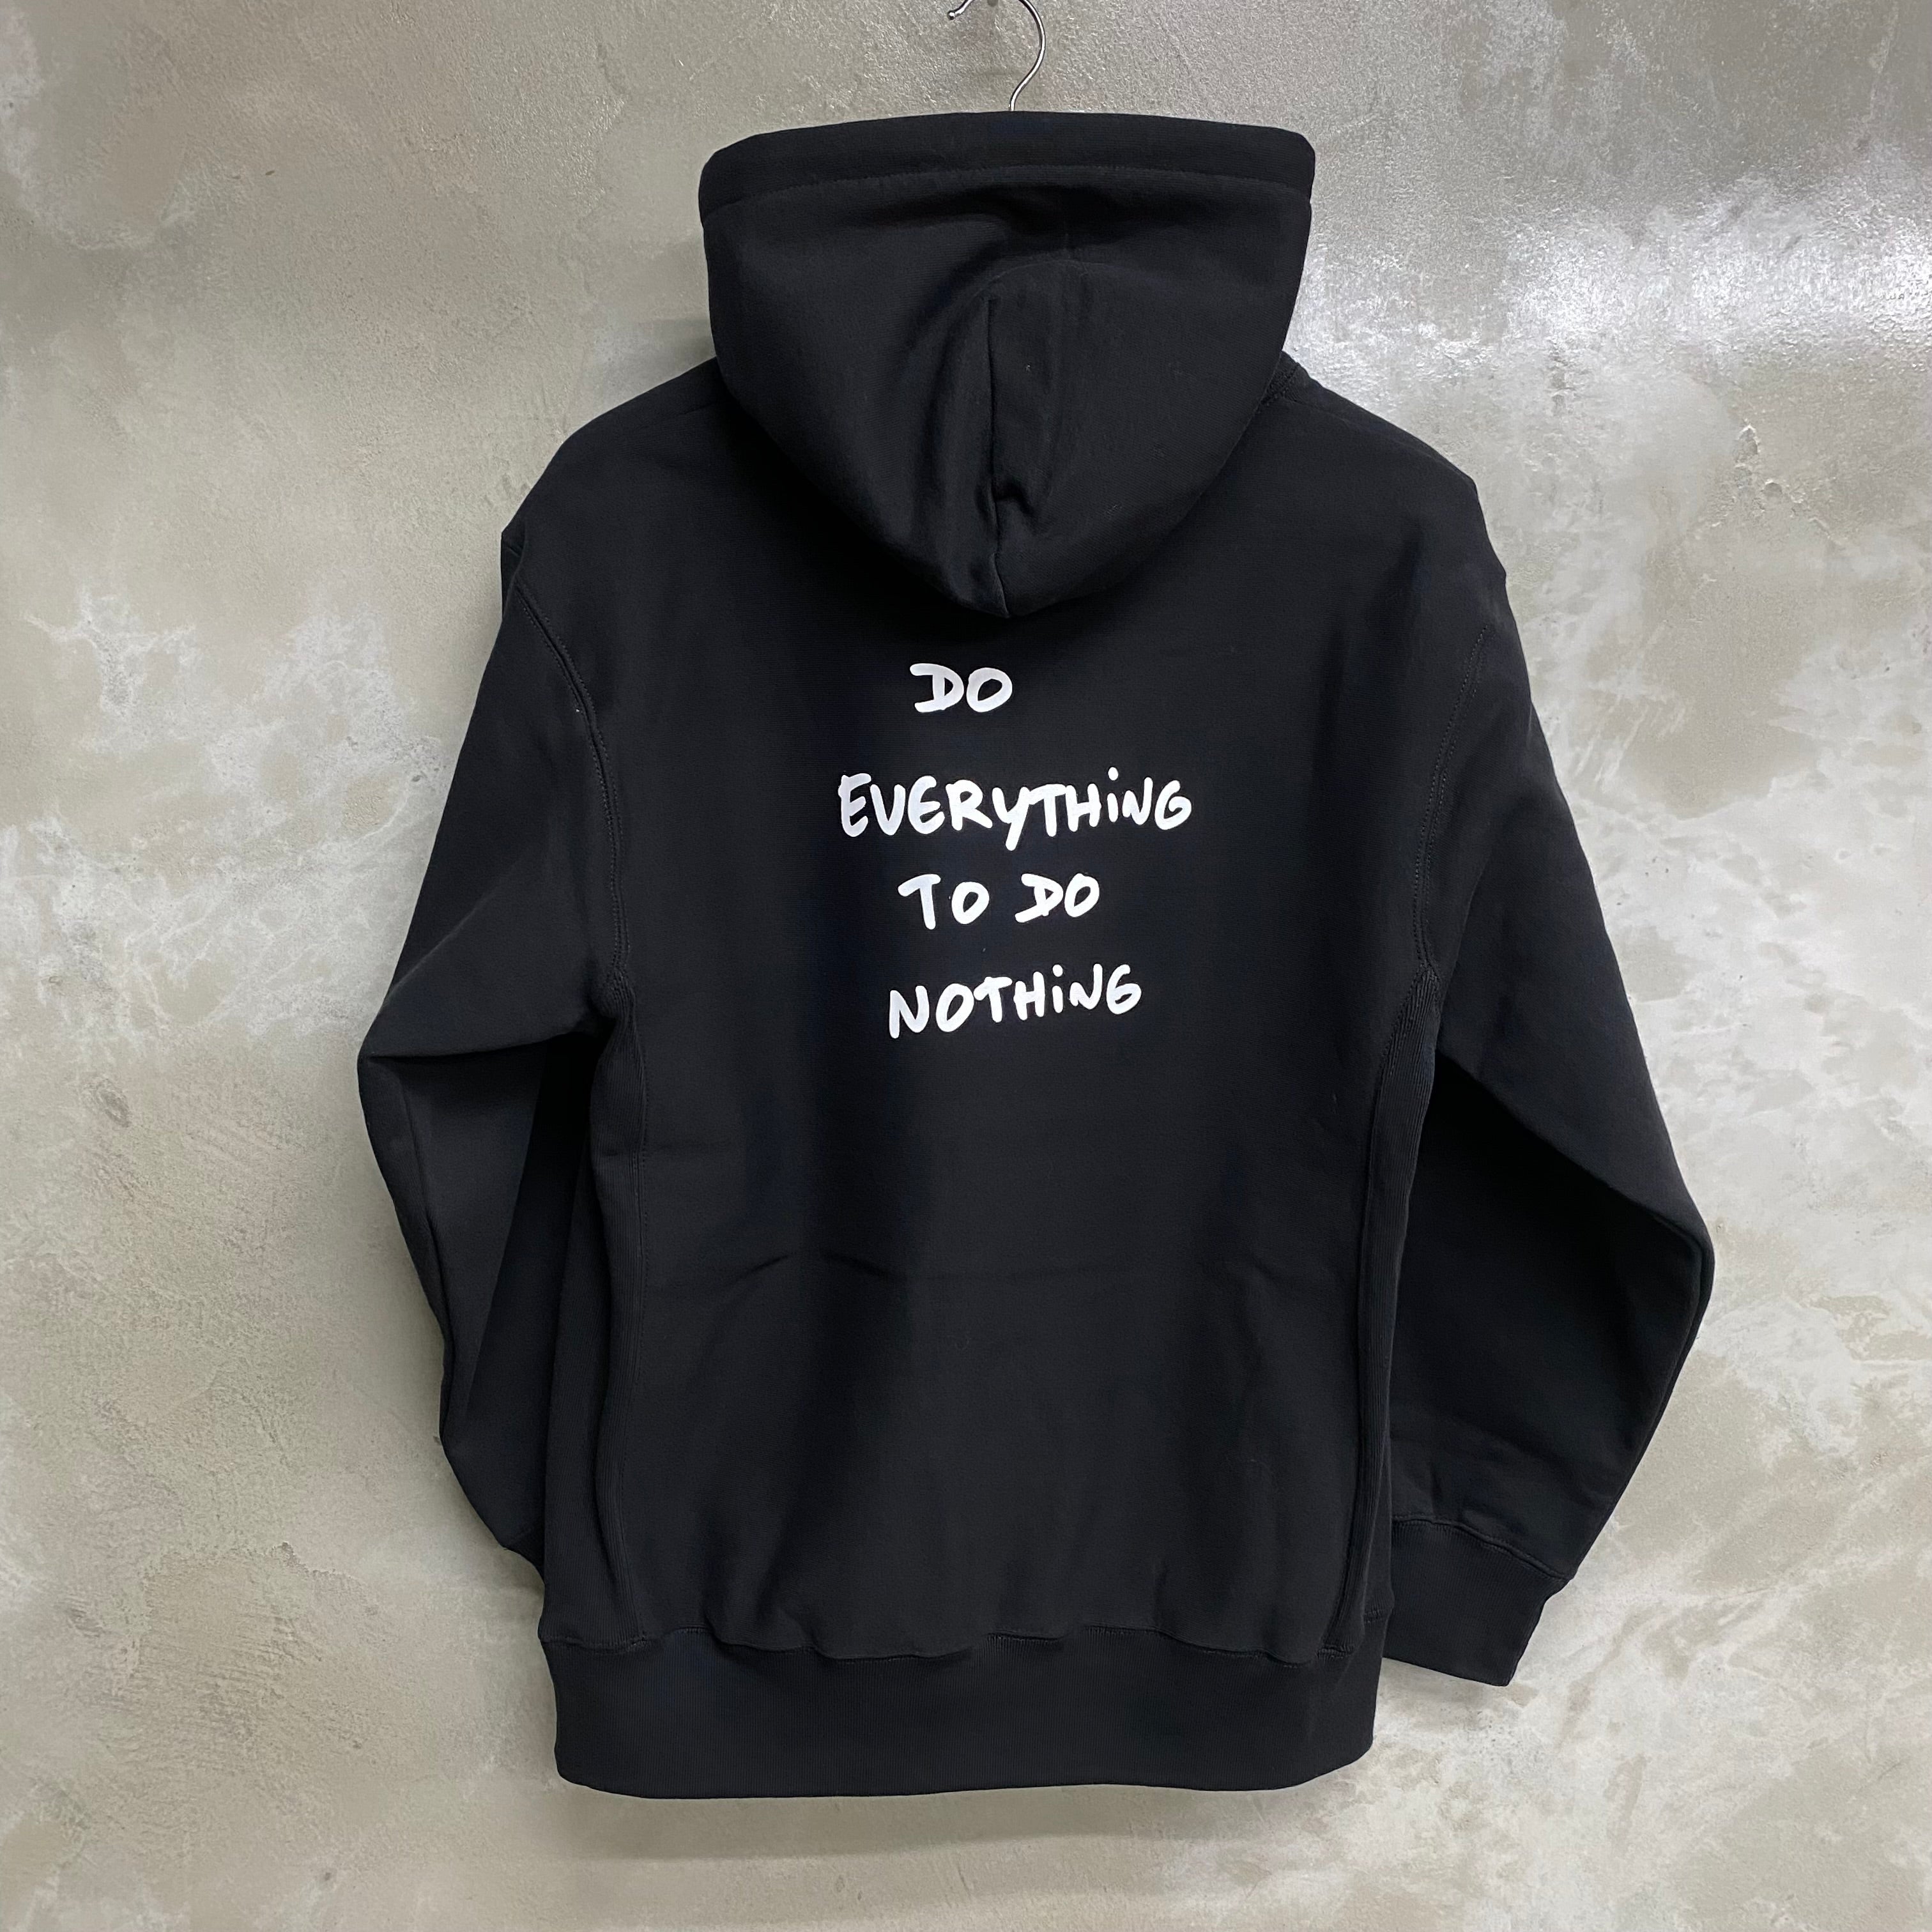 Do Nothing Congress PULL OVER HOODIE  DNC x Thomas Lelu Pull " DO EVERYTHING " / Do Nothing Congress